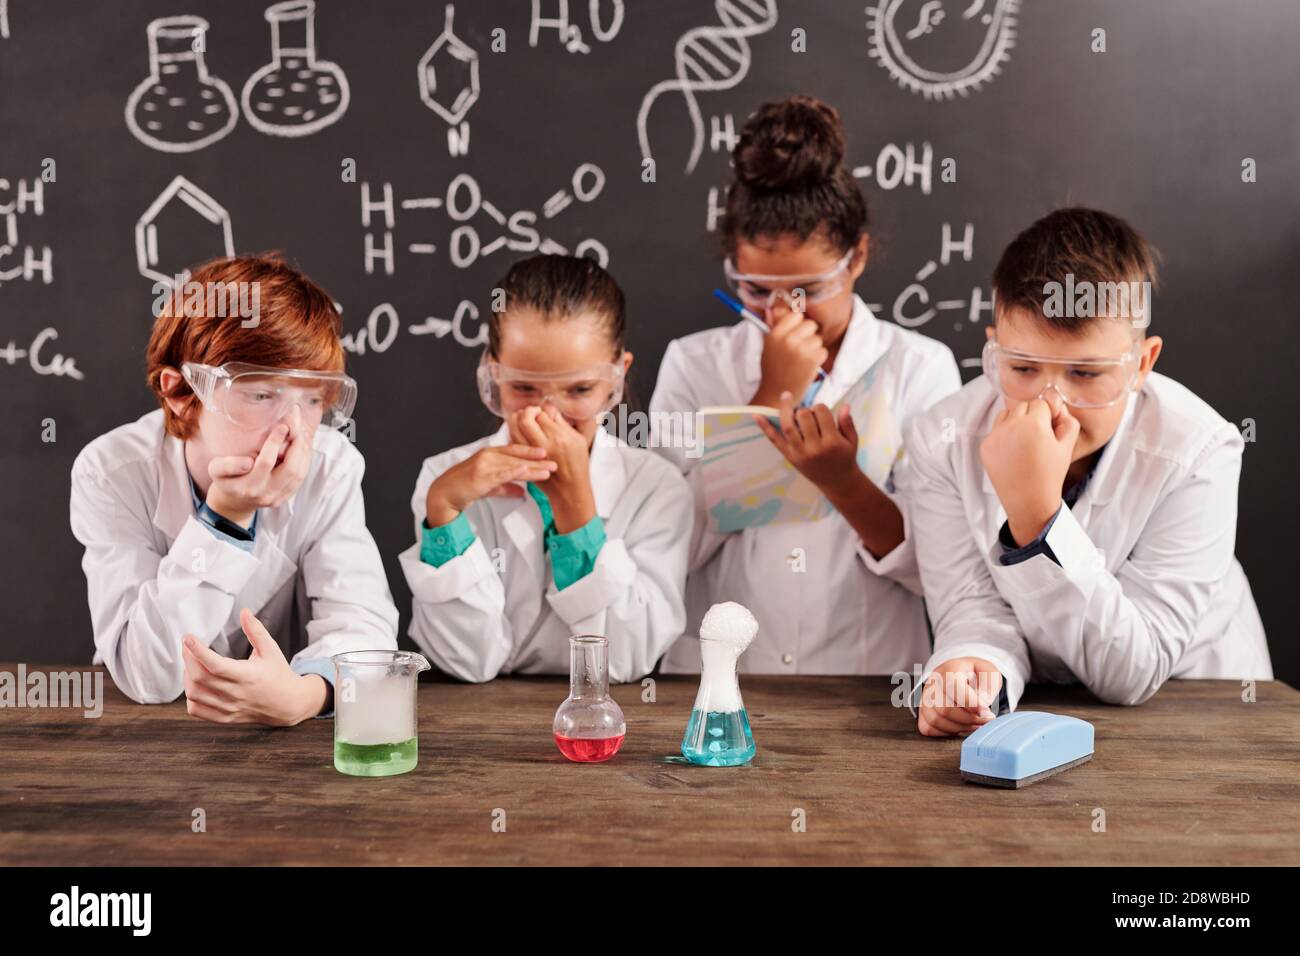 Cute schoolkids in protective eyeglasses plugging noses while watching reactions Stock Photo